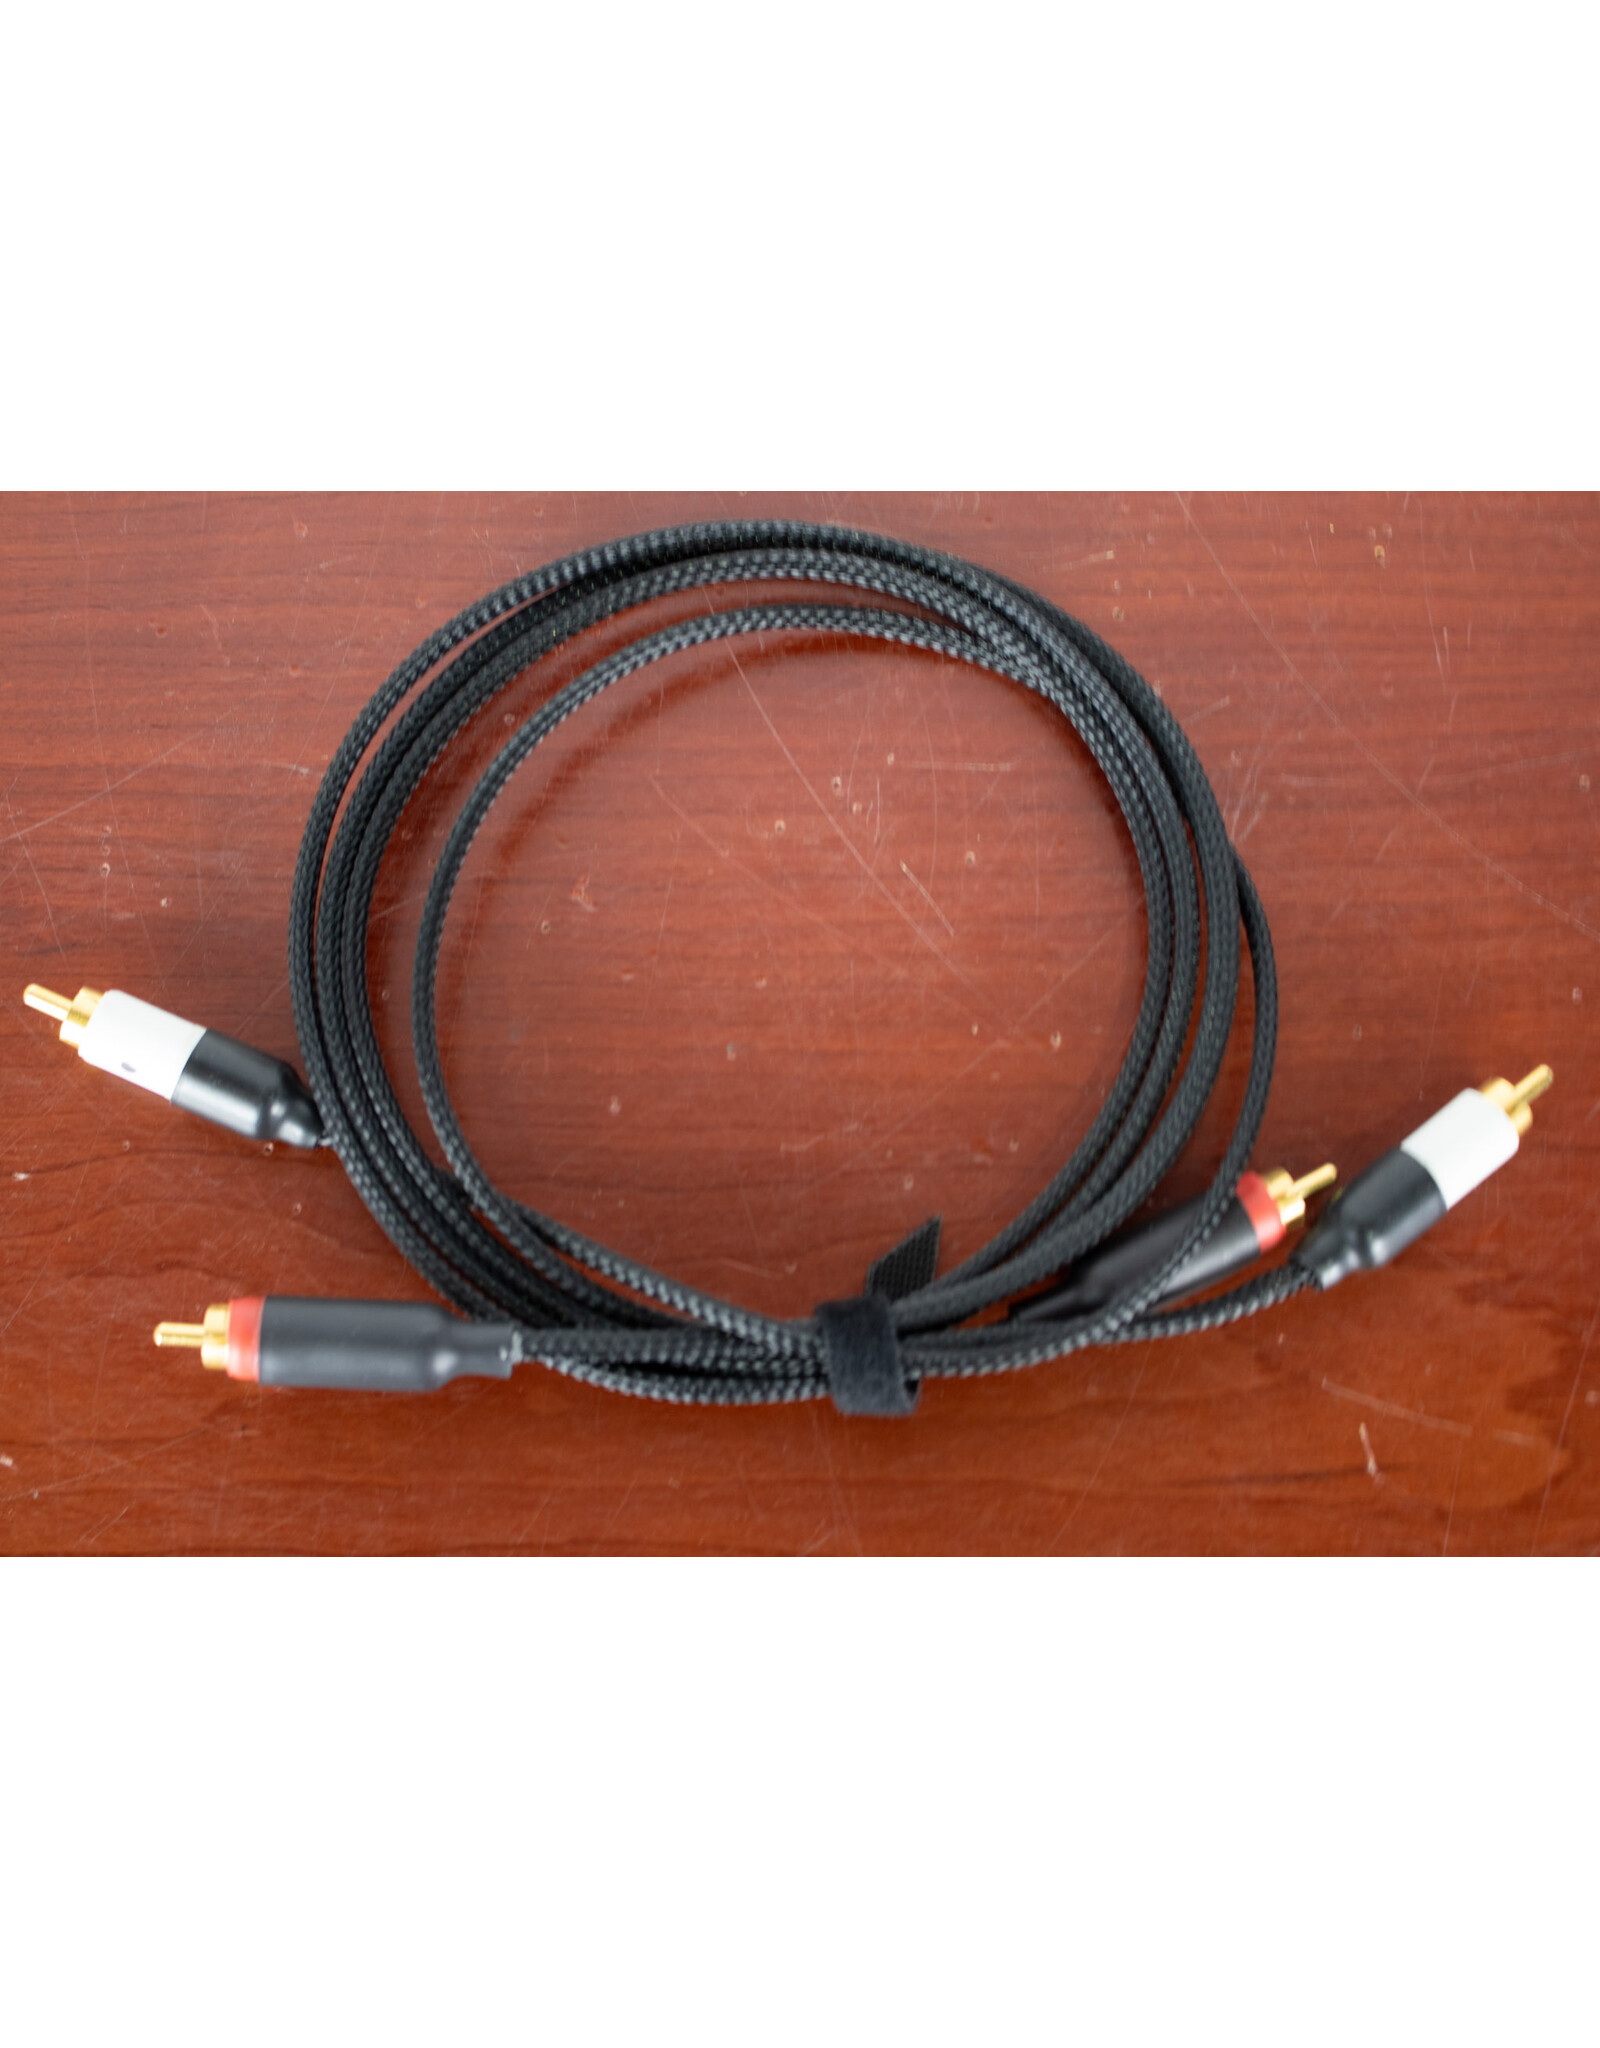 Gig Harbor Audio Gig Harbor Audio 1m RCA Cables USED